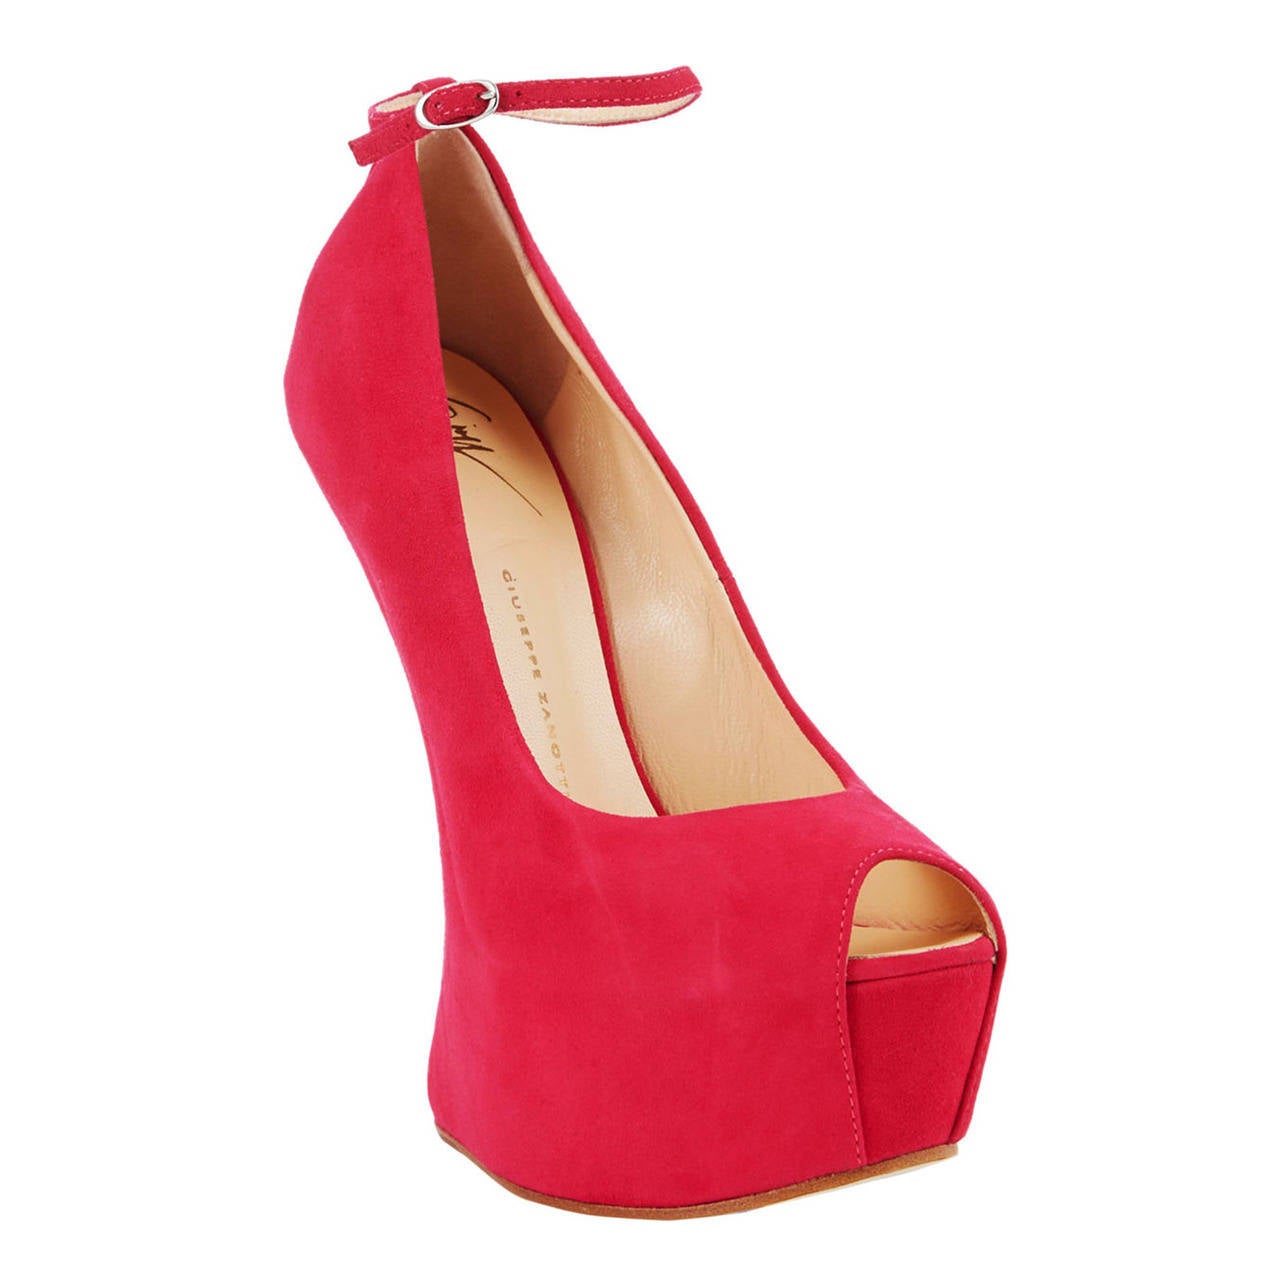 New GIUSEPPE ZANOTTI BOUGANVILLE SCULPTED WEDGES with OPEN TOE